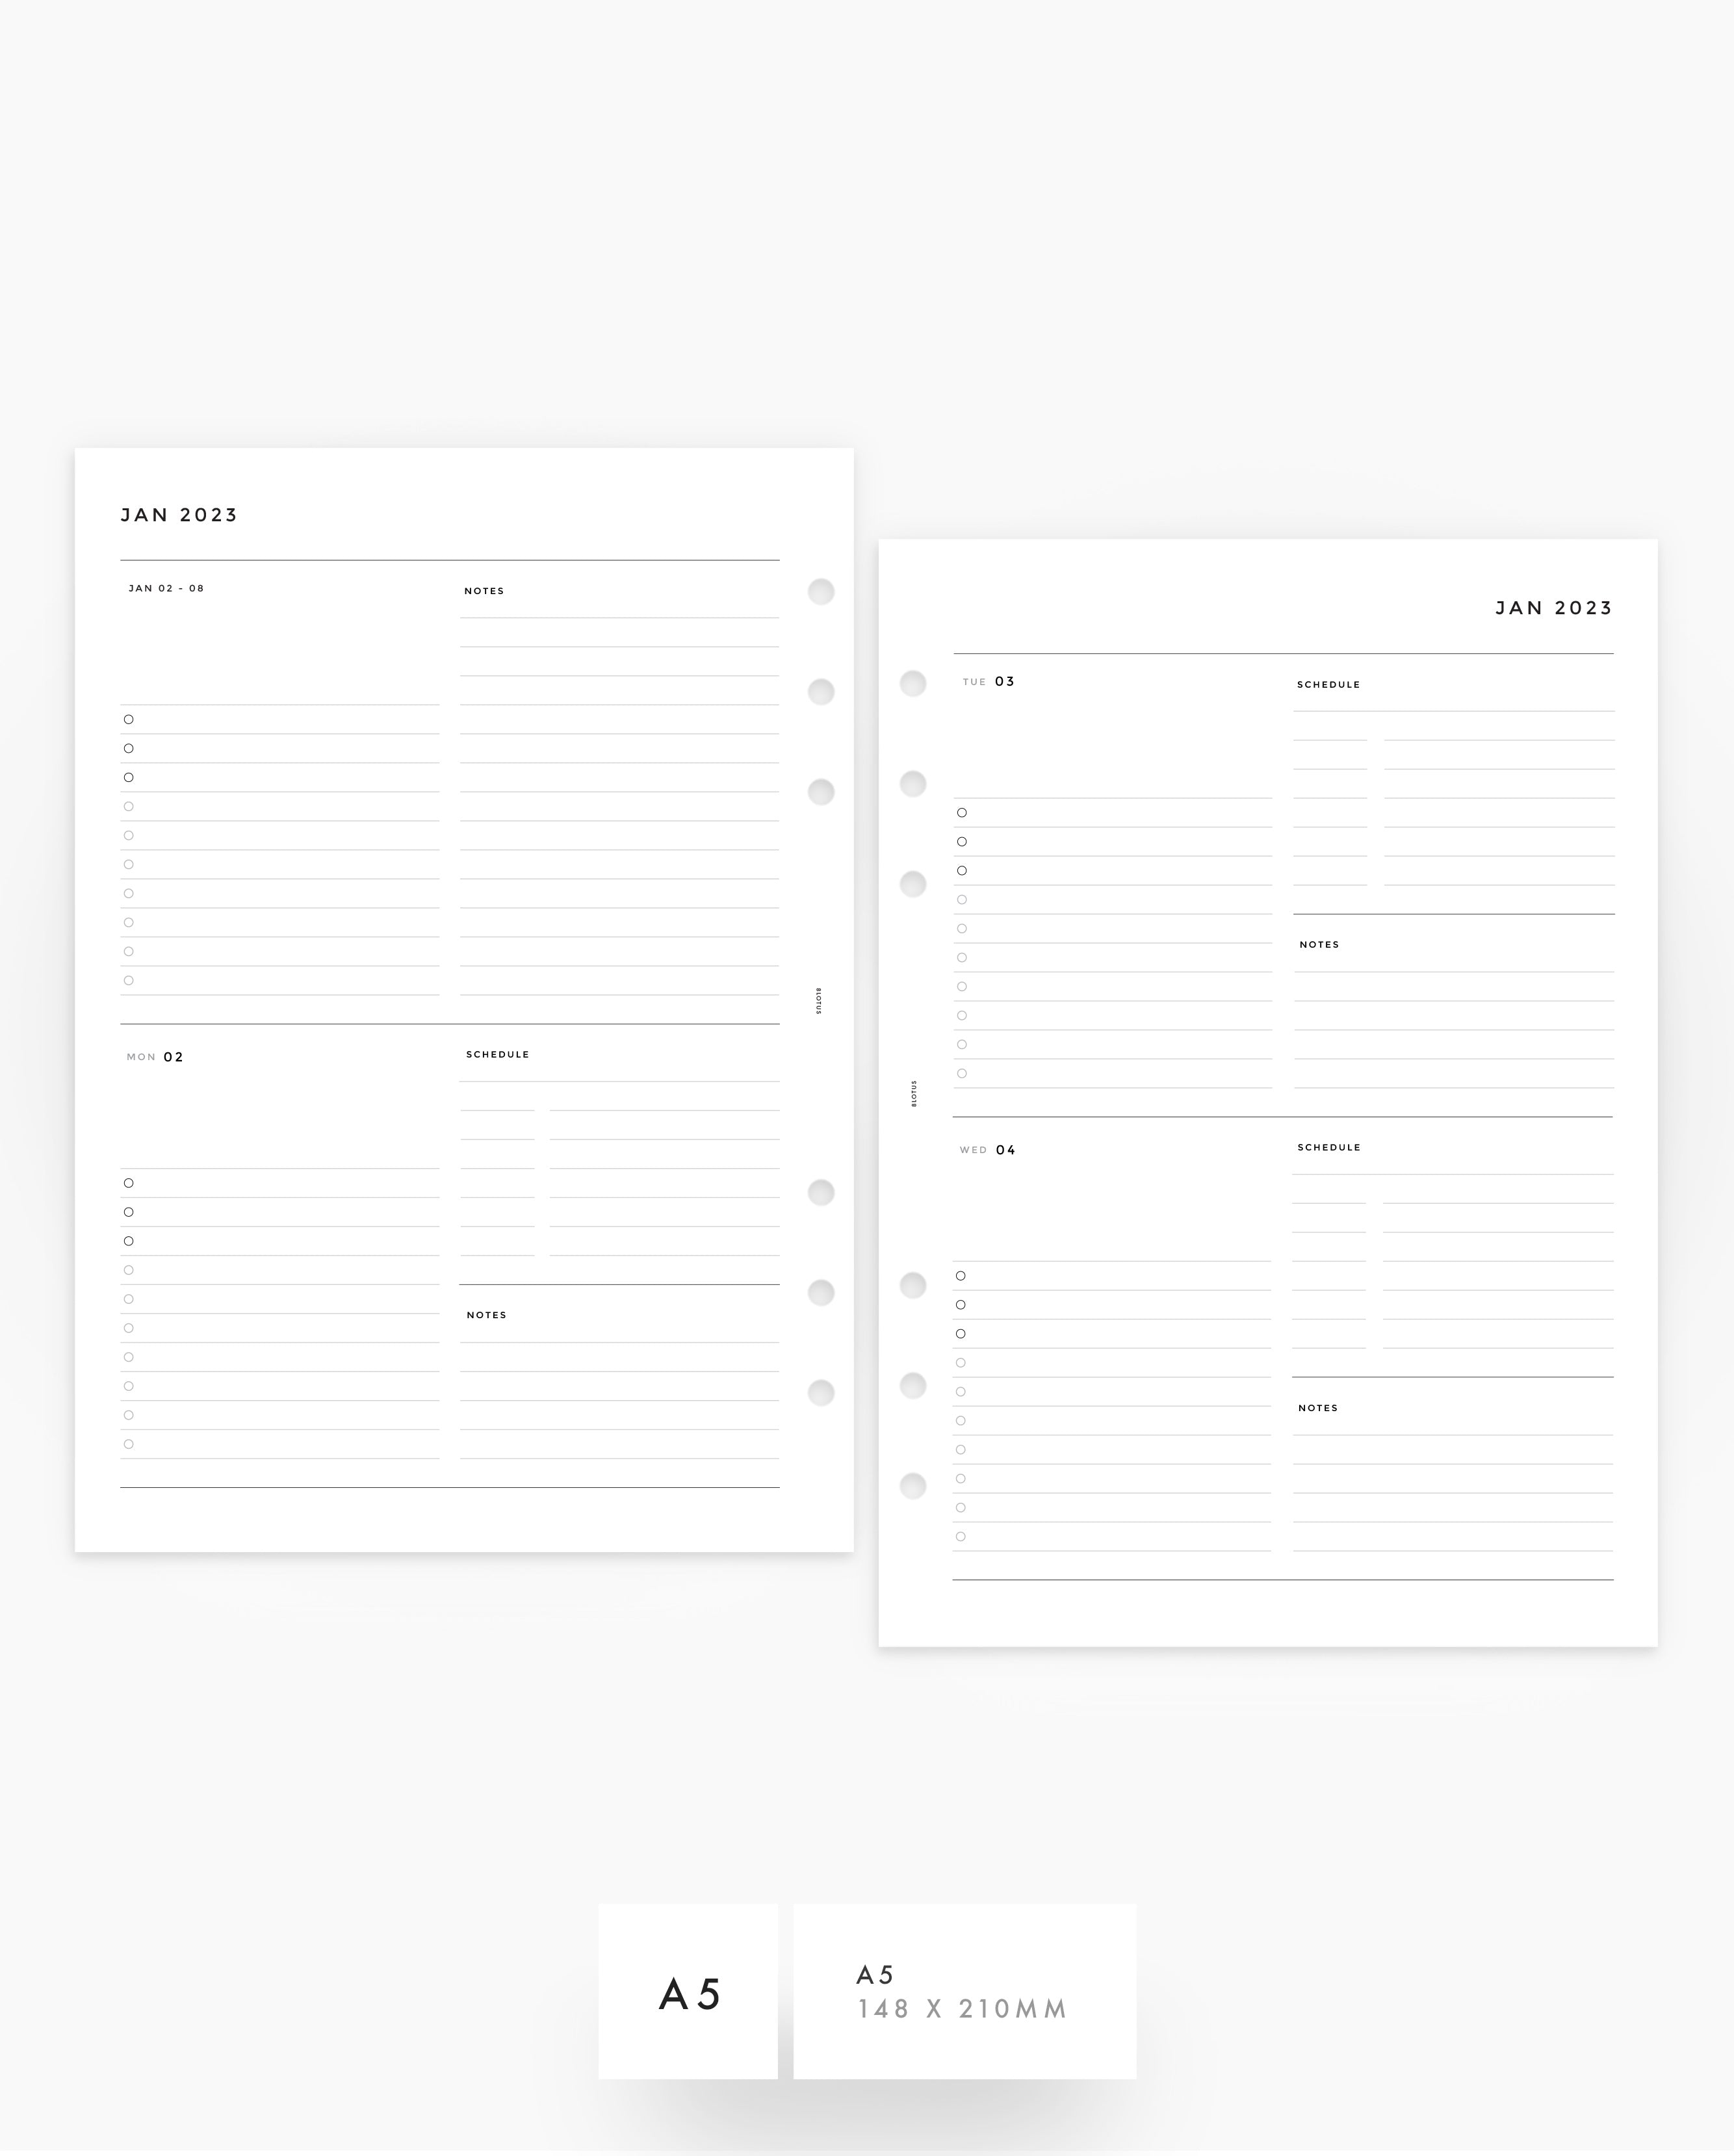 MN079 - 2023 DAILY PLANNER - 2DO1P - PDF